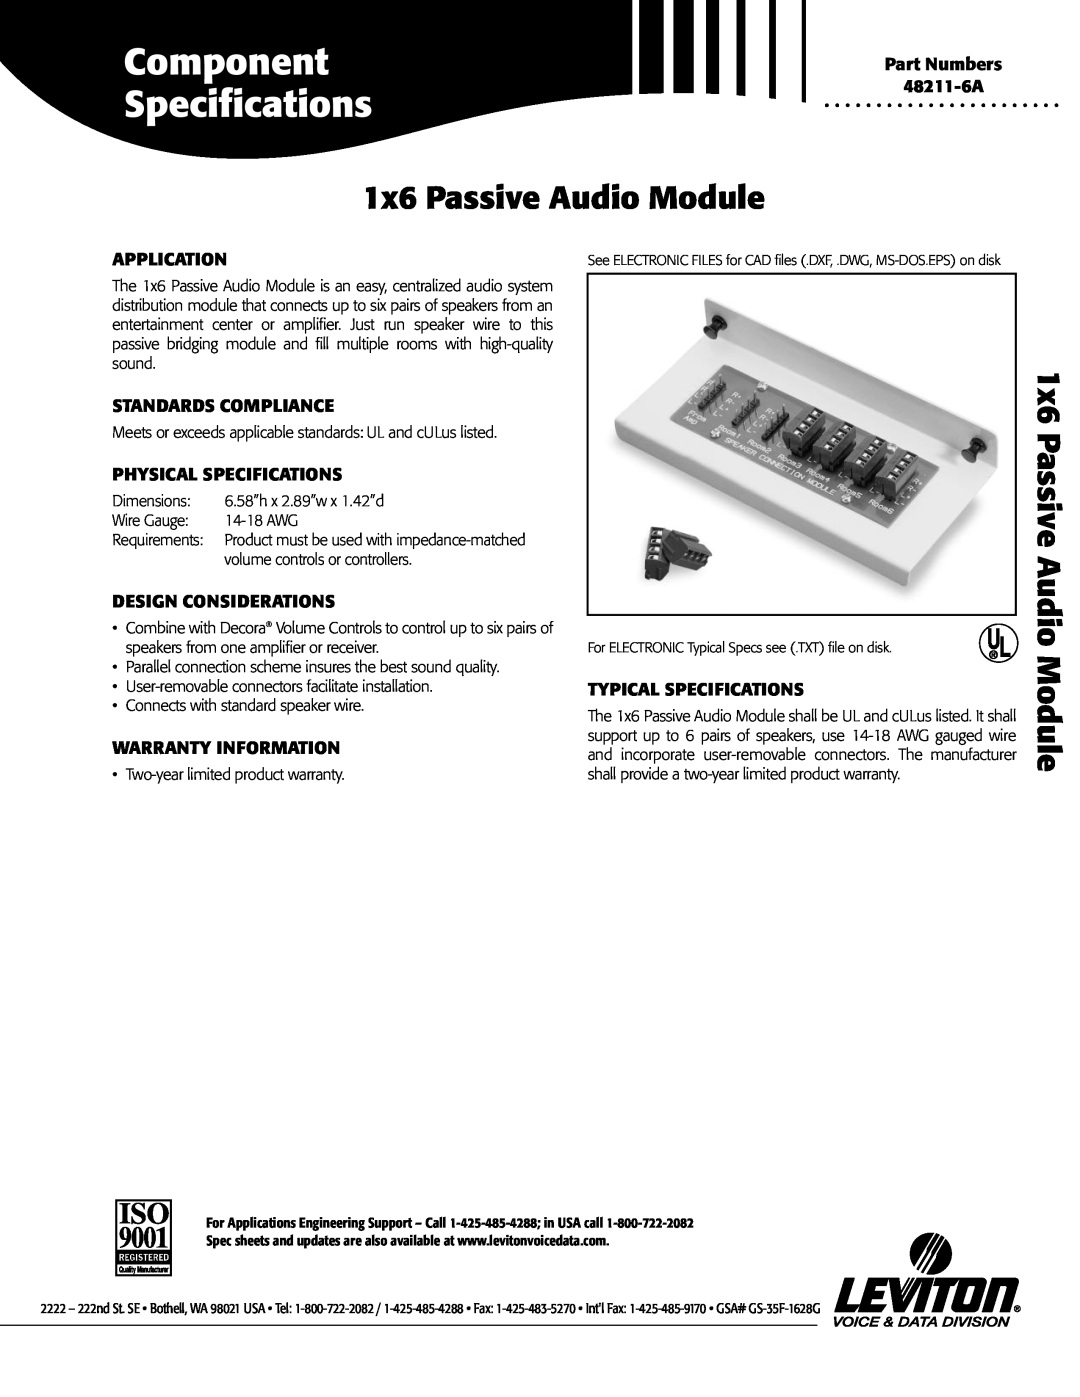 Leviton 48211-6A specifications 1x6 Passive Audio Module, Application, Standards Compliance, Physical Specifications 